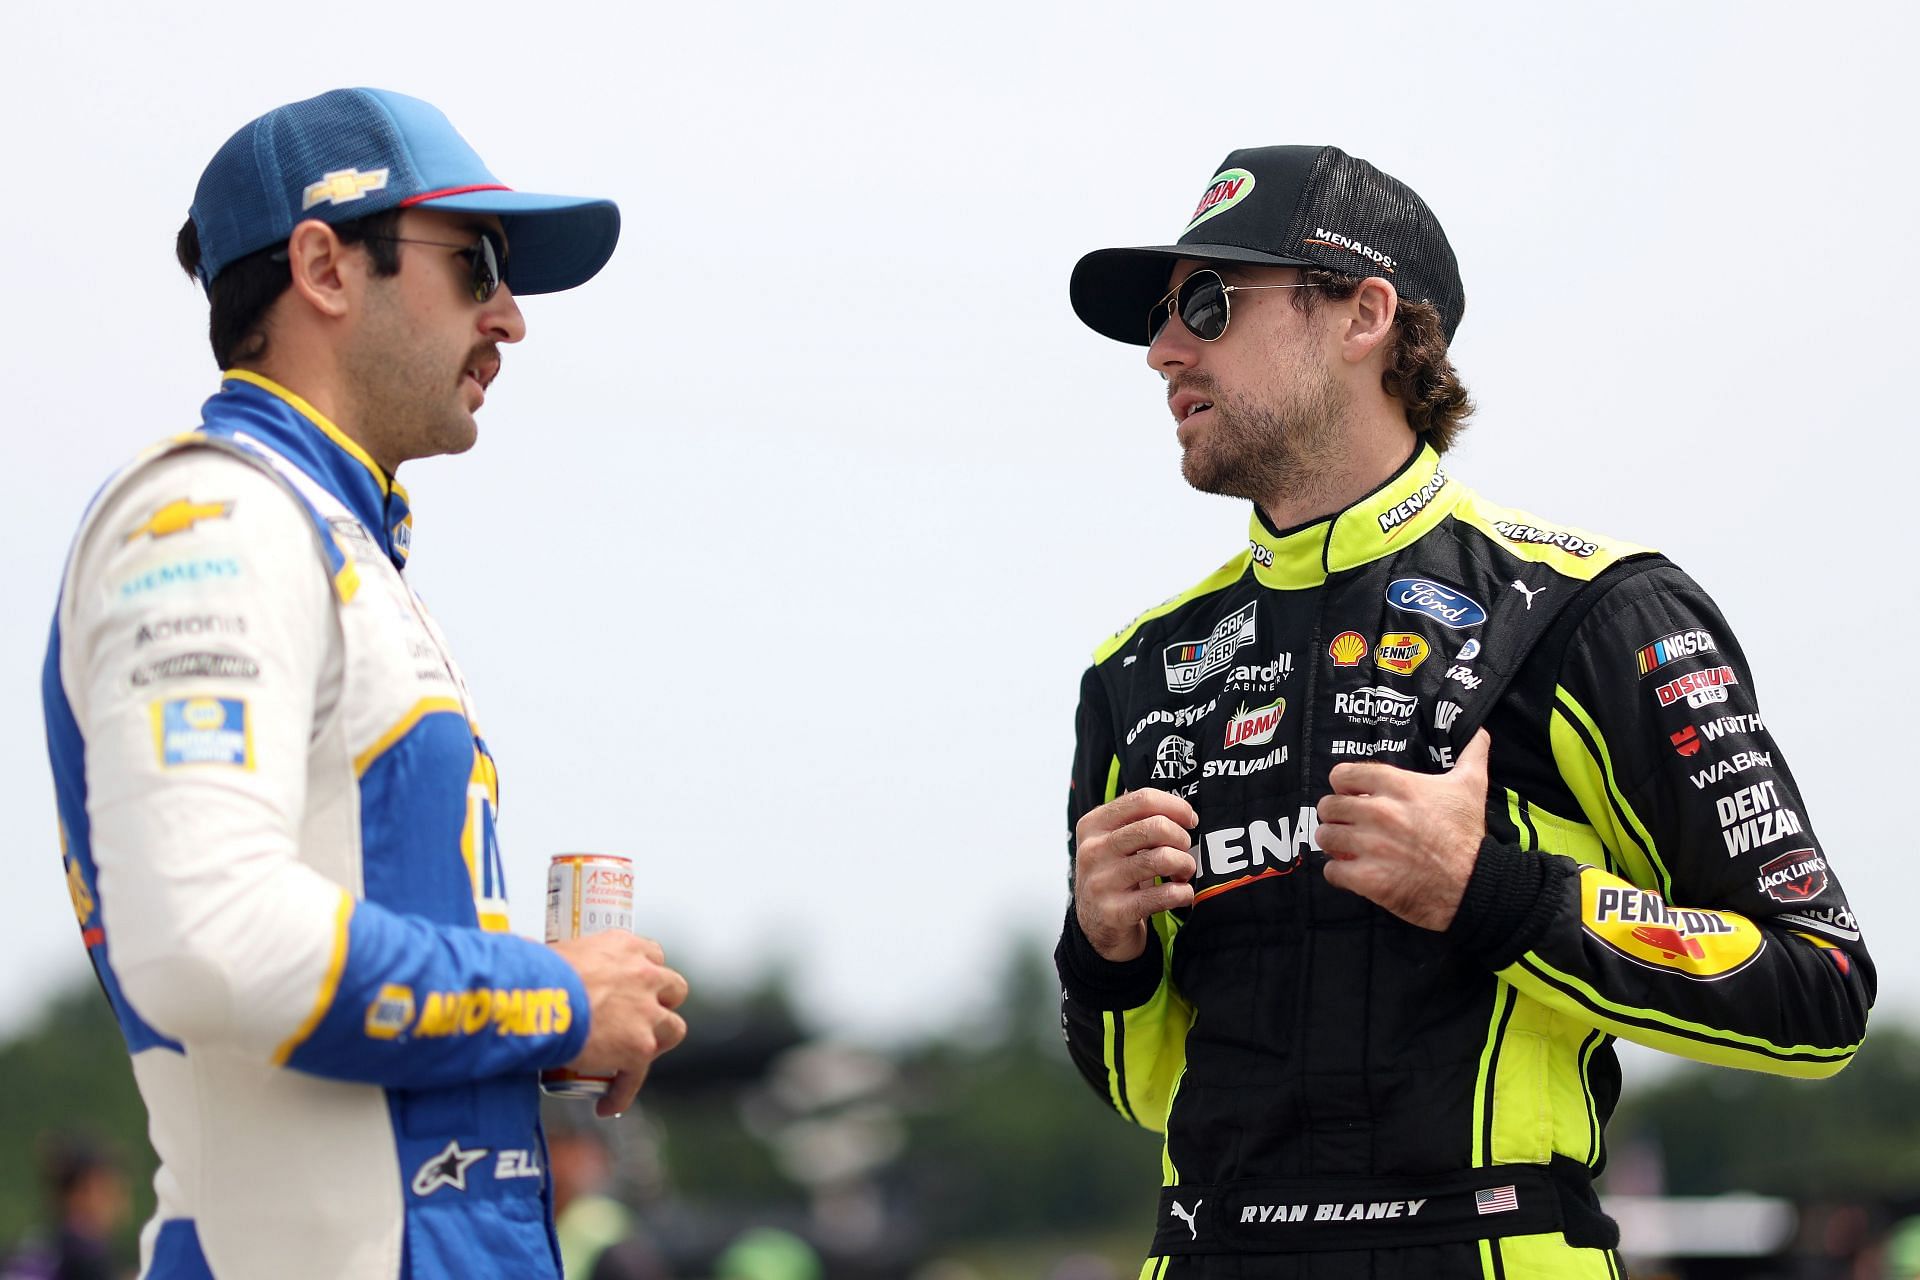 Chase Elliott and Ryan Blaney during practice for the NASCAR Cup Series Ambetter 301 at New Hampshire Motor Speedway